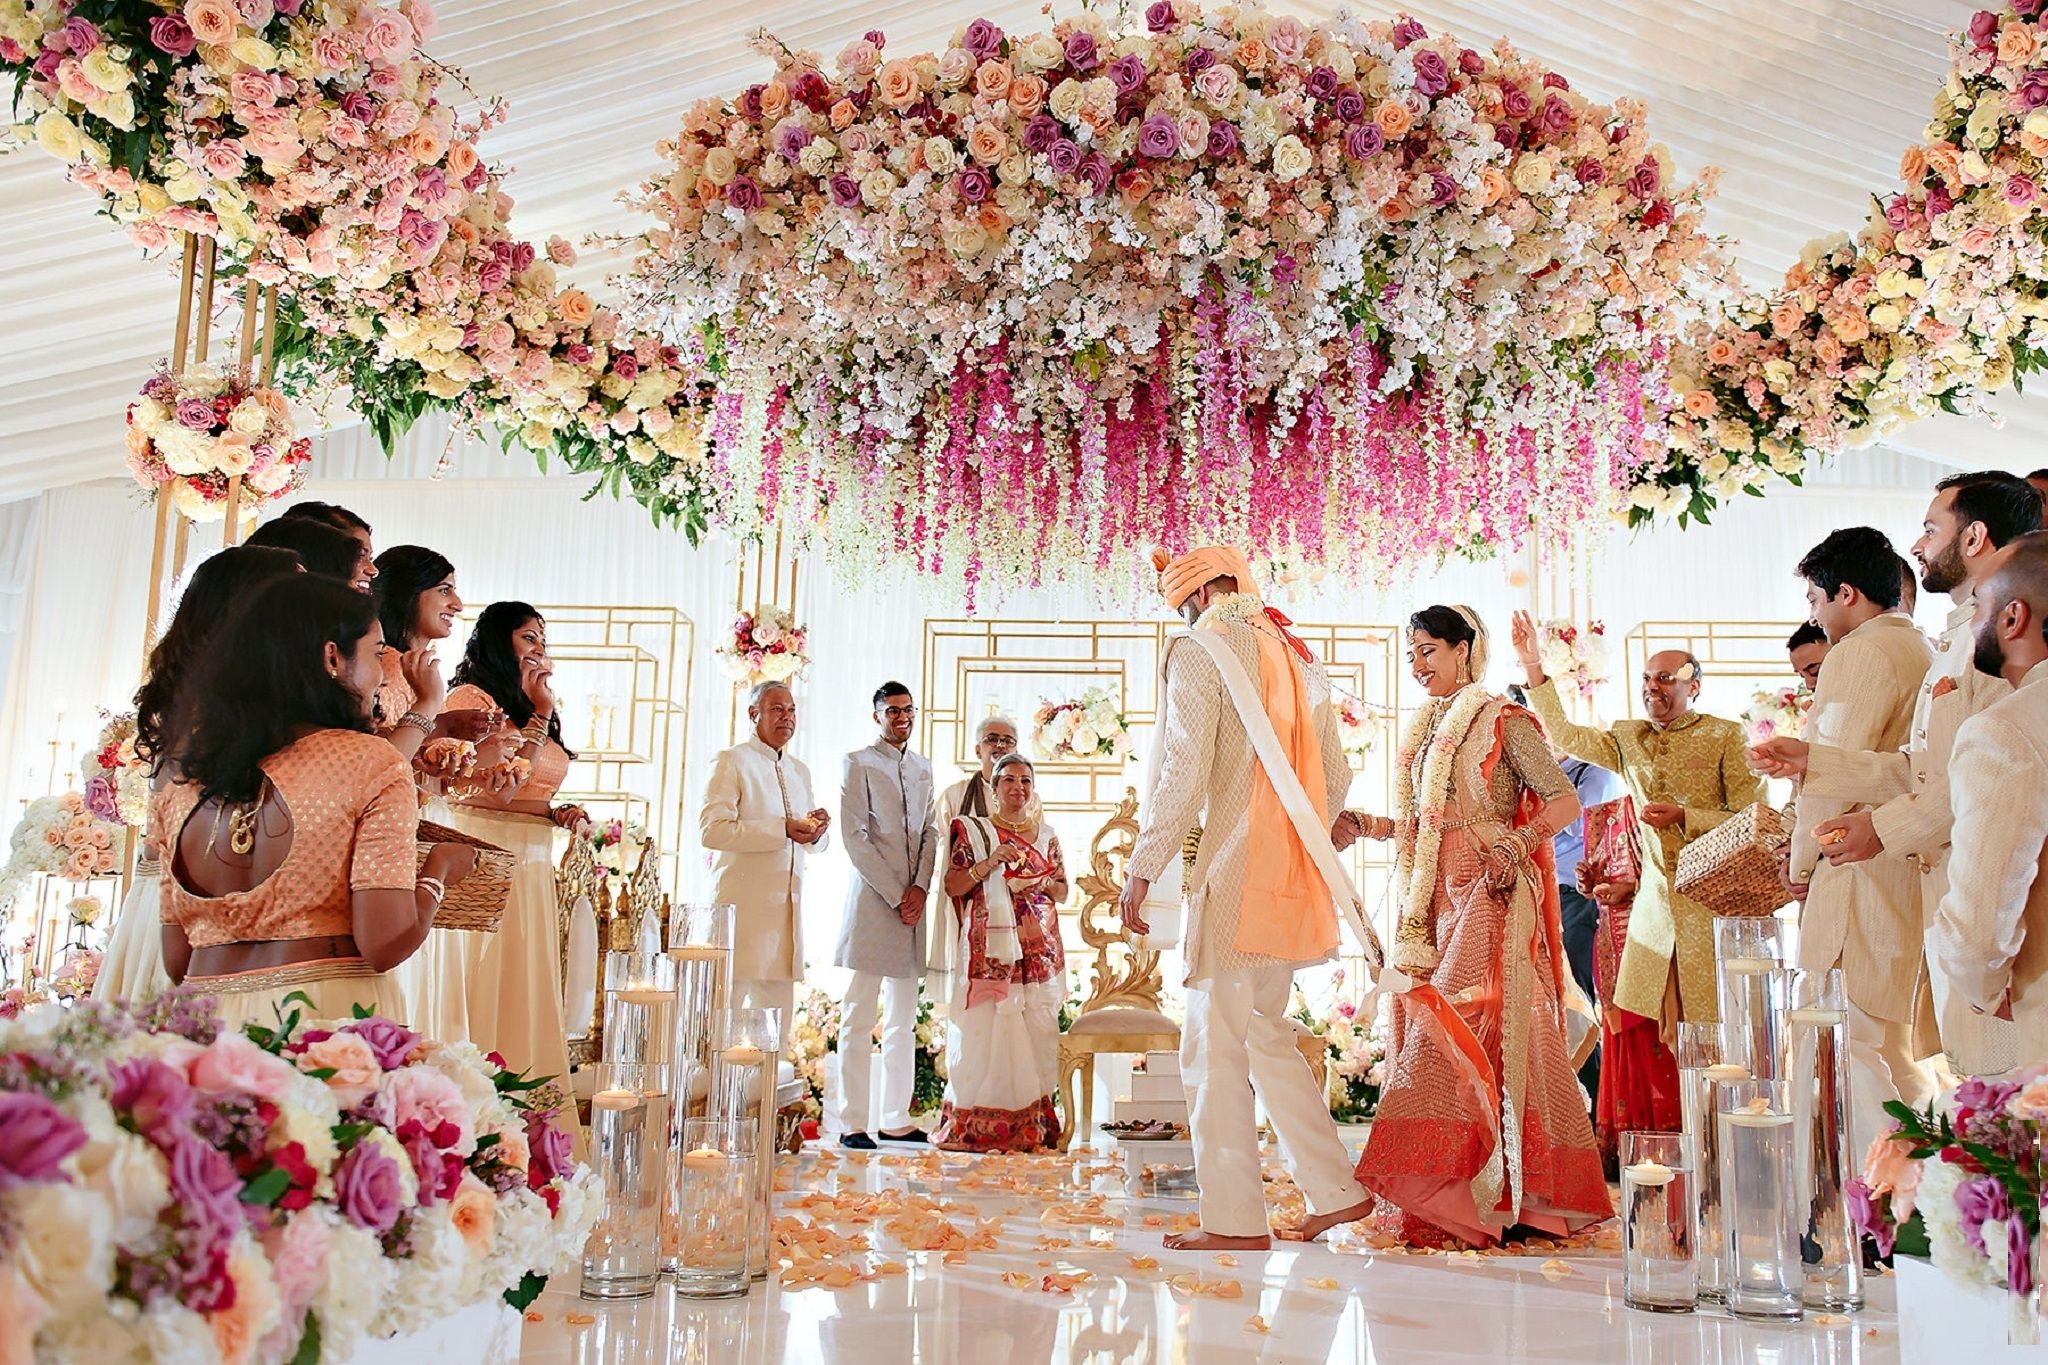 A Quick Guide to Choosing an Indian Wedding Venue